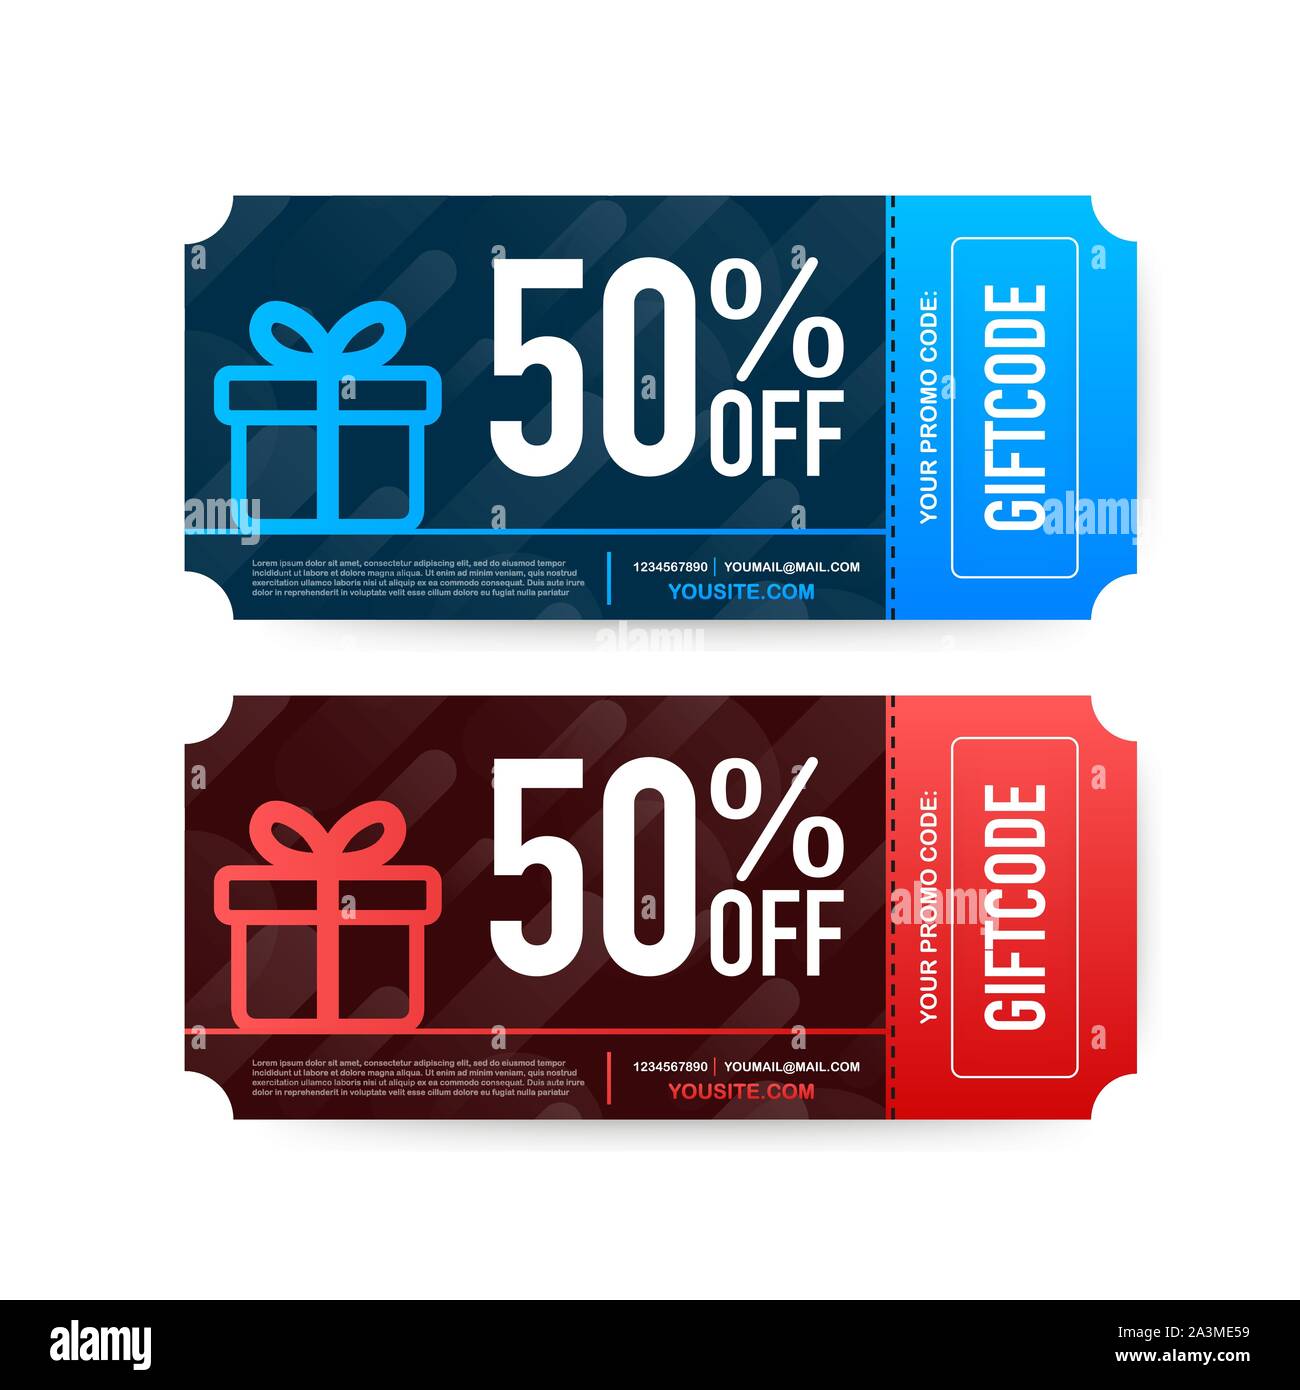 Discount coupon half price offer promo code gift Vector Image